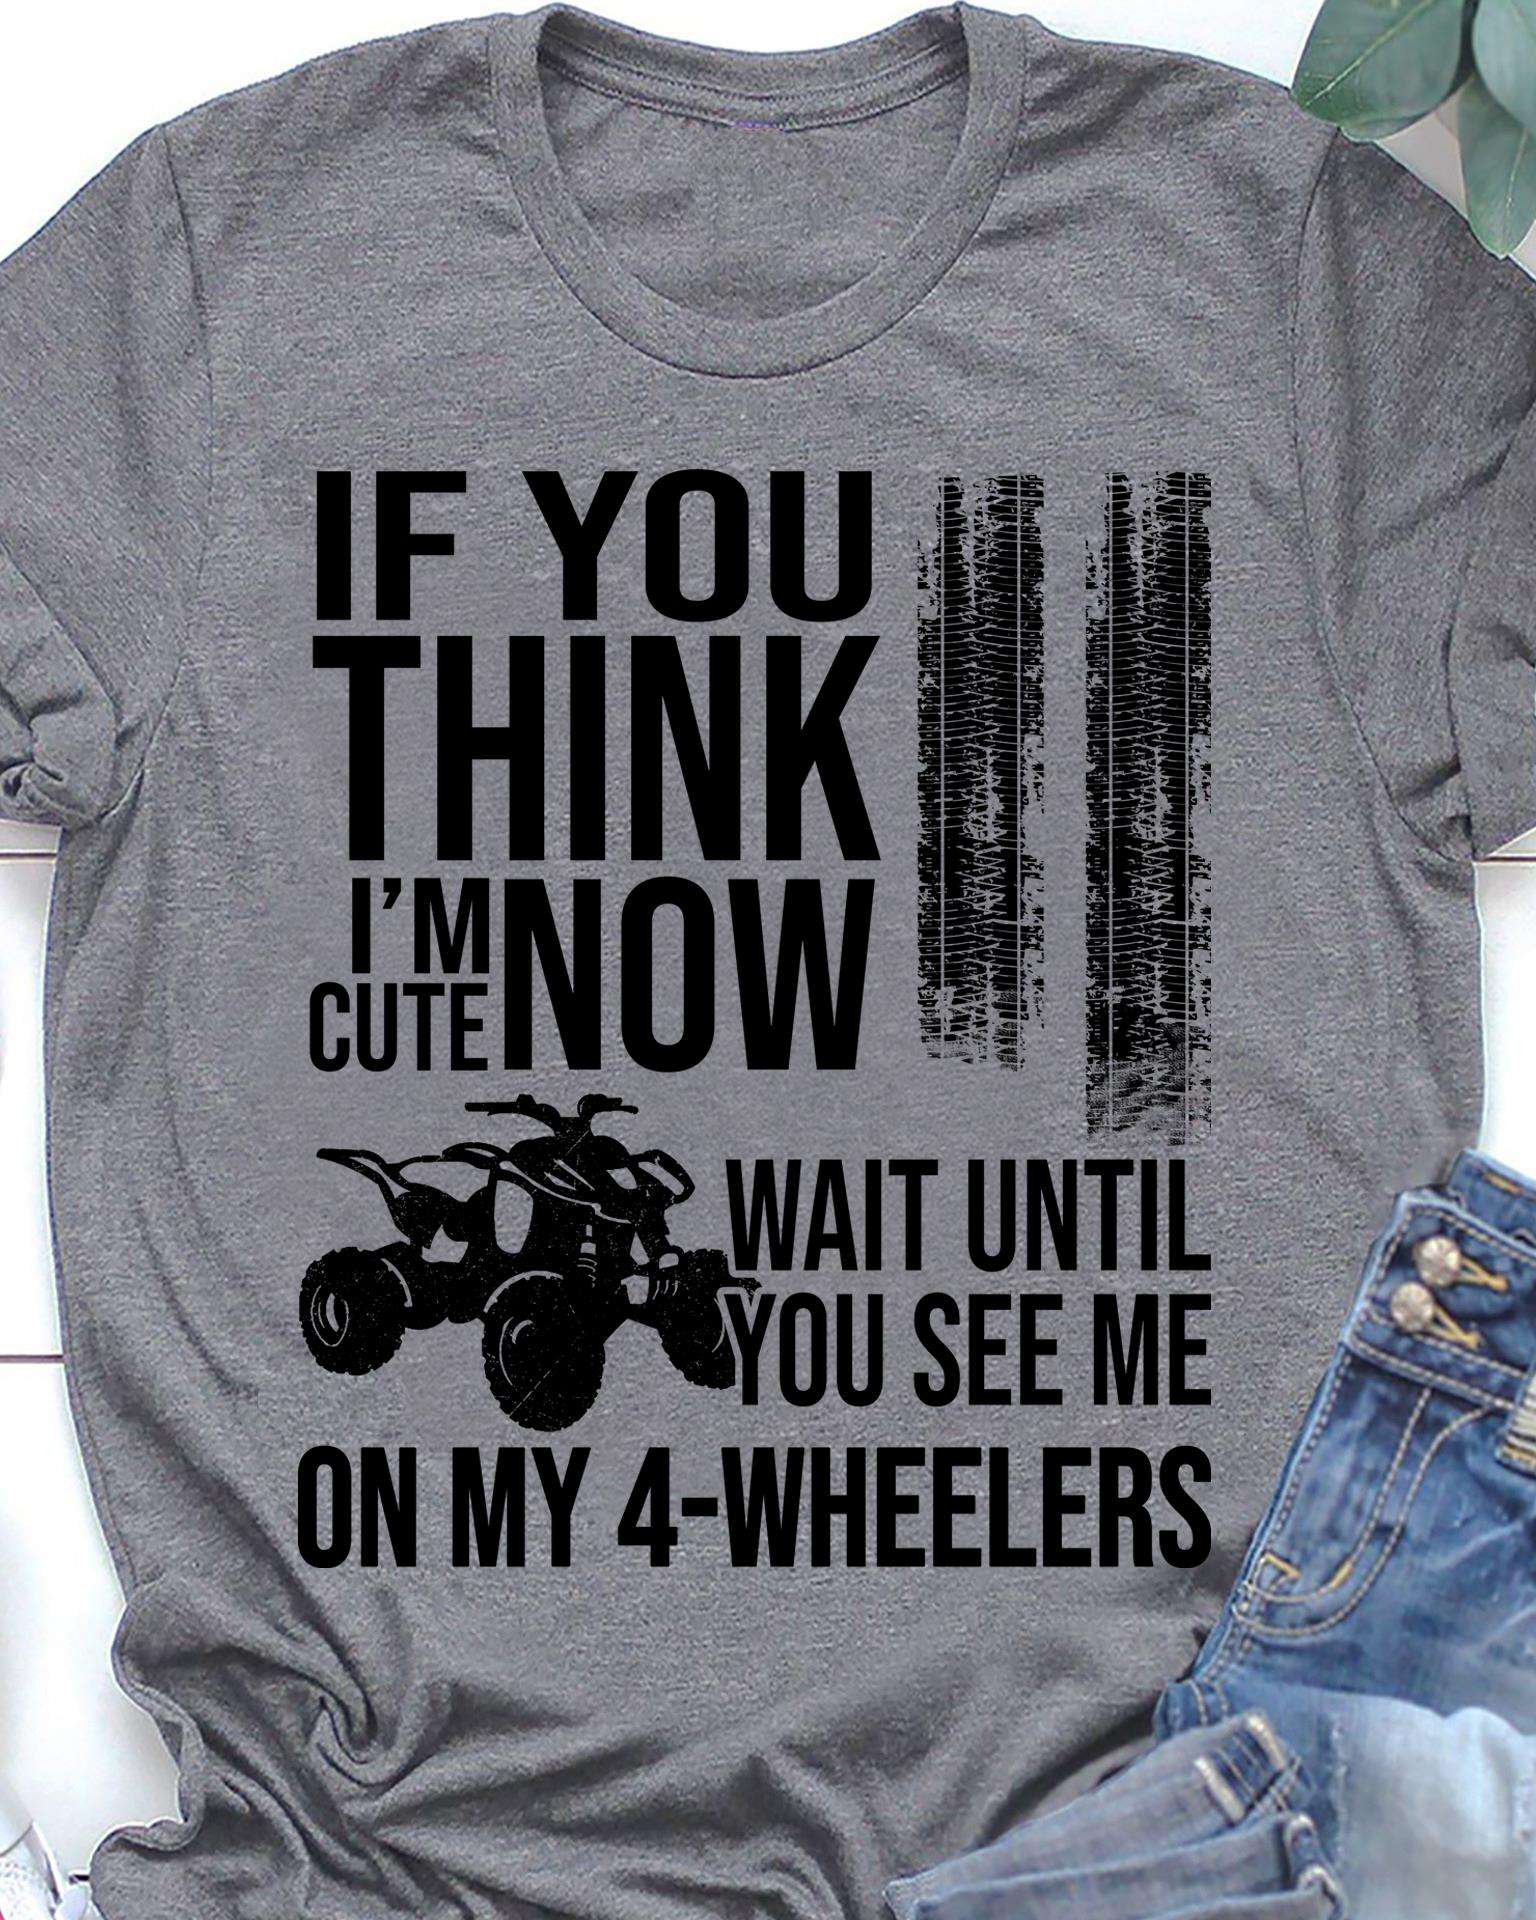 Gift for racer, Love 4 wheeler - If you think i'm cute now wait until you see me on my 4 wheelers